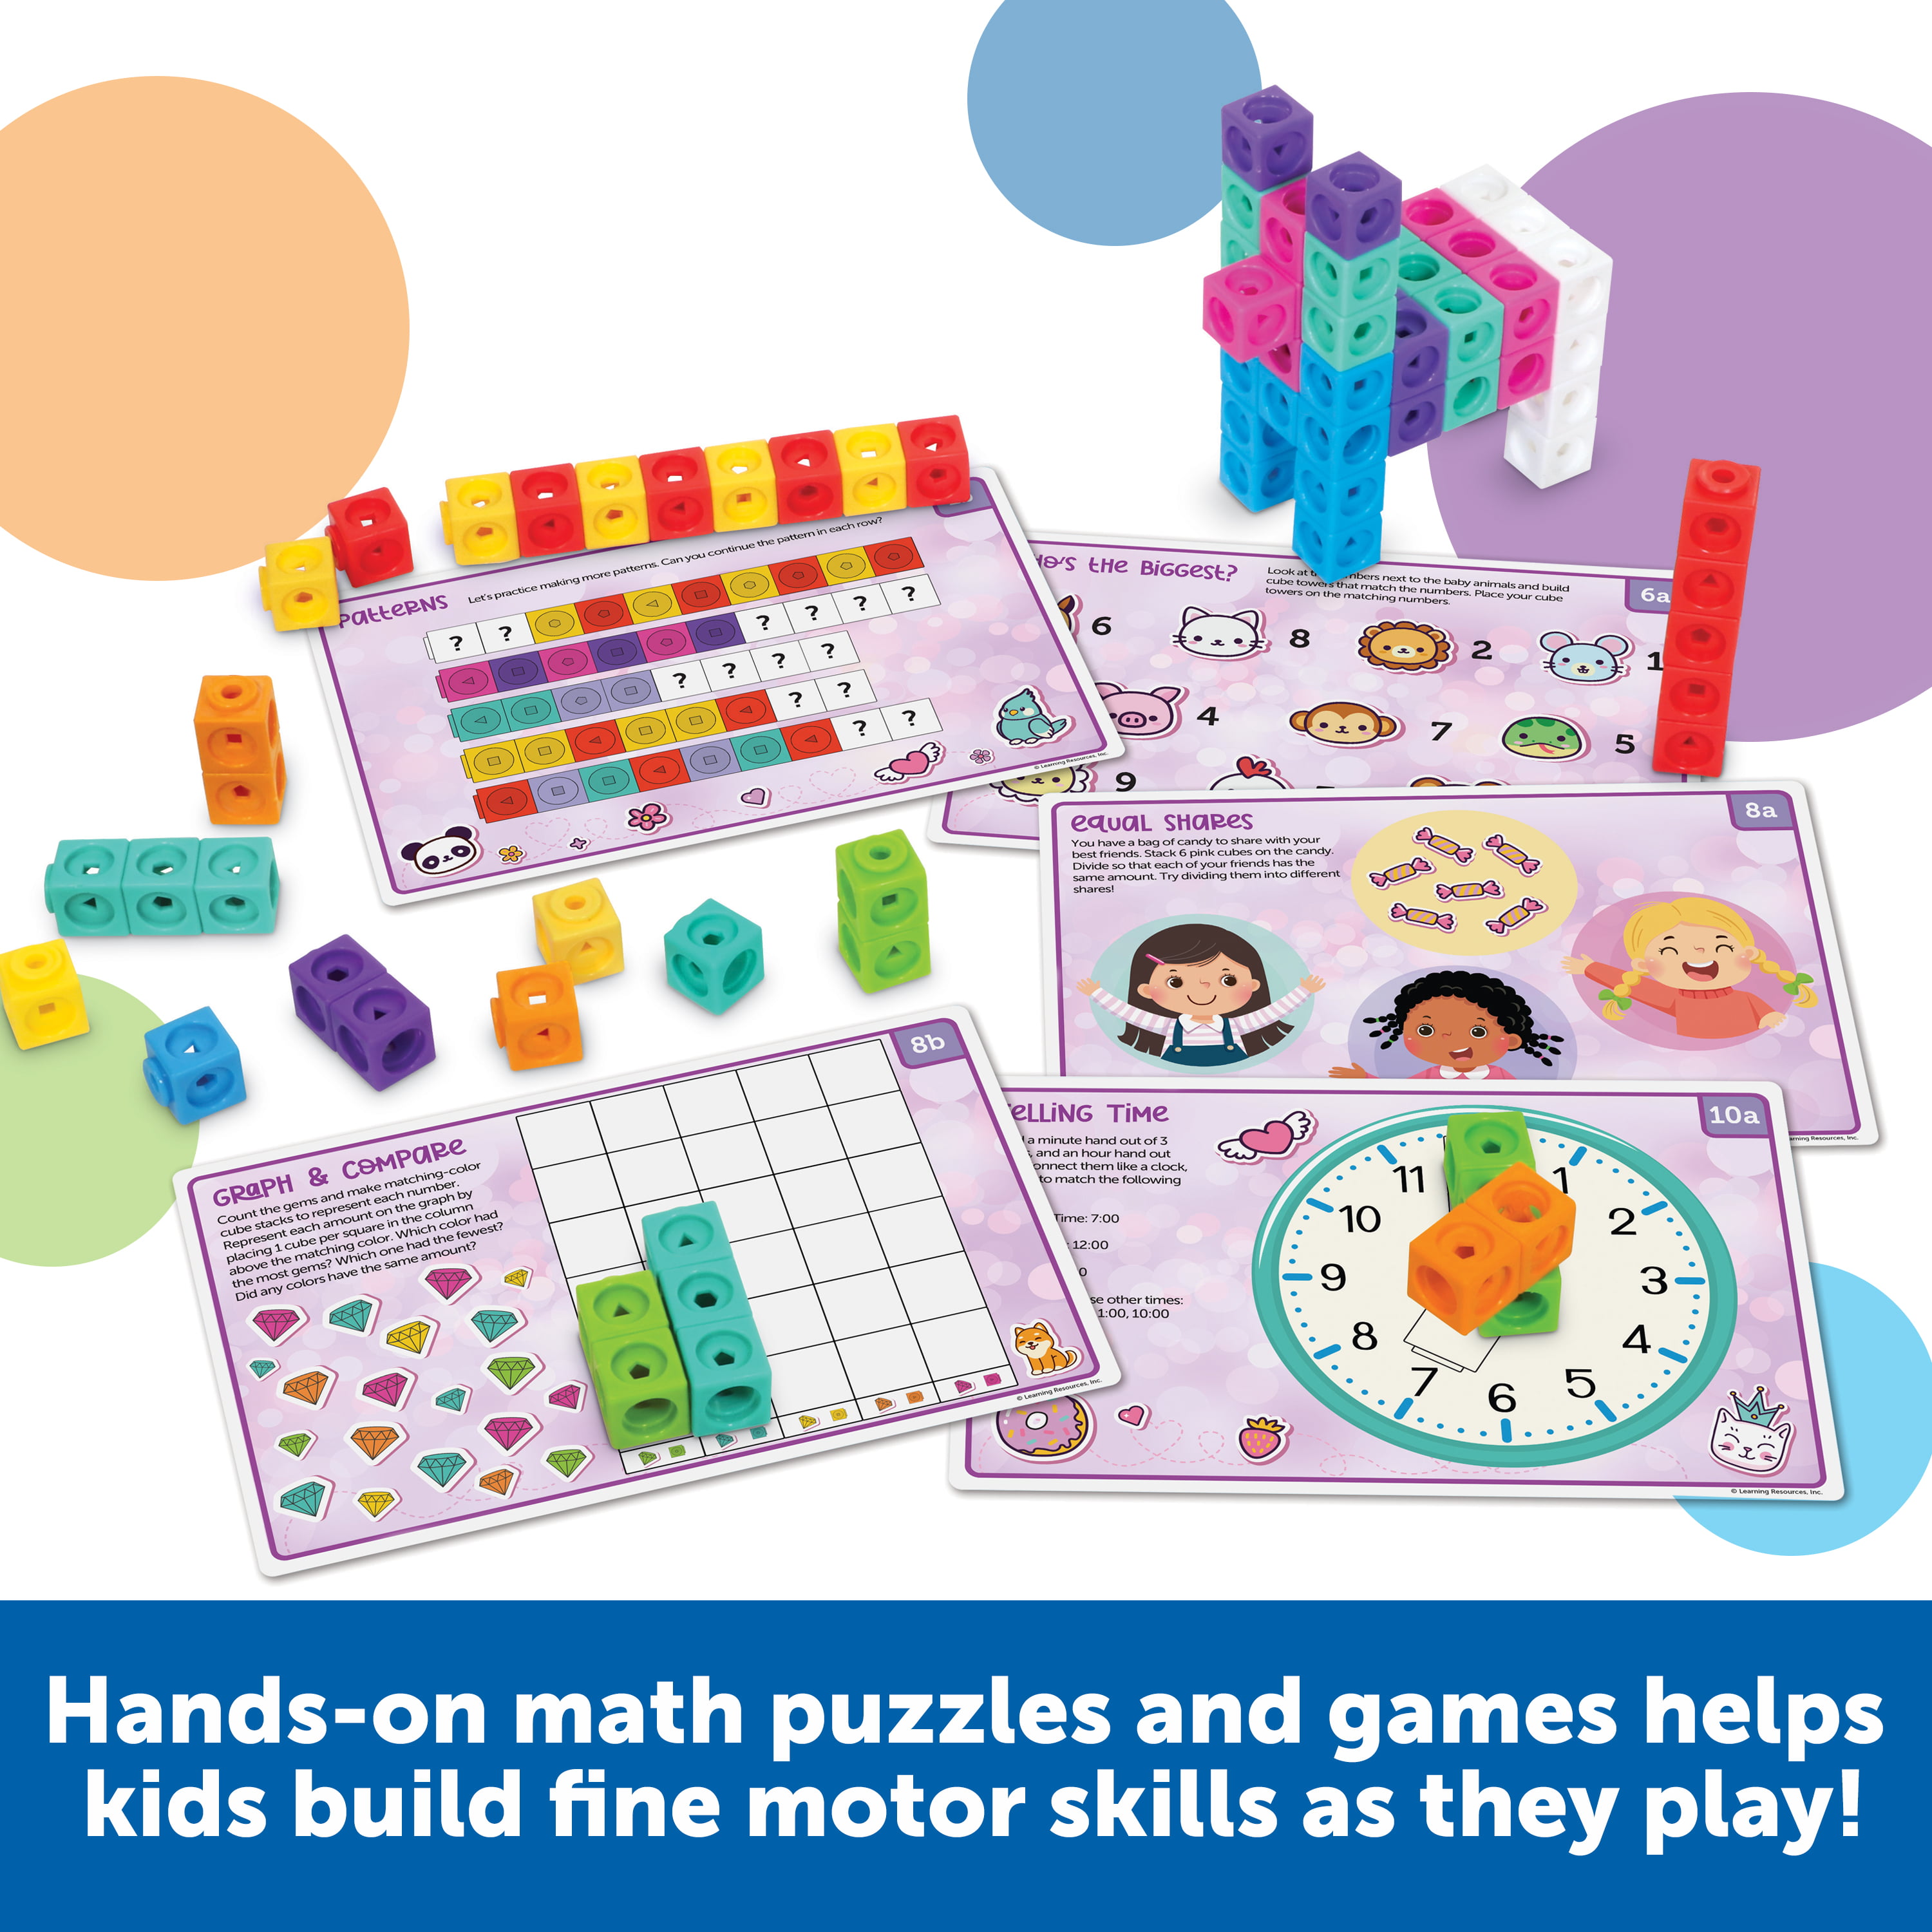 Learning Resources MathLink Cubes Preschool Math Activity Set - 115 Pieces,  Preschool STEM Activities for Boys and Girls Ages 3+